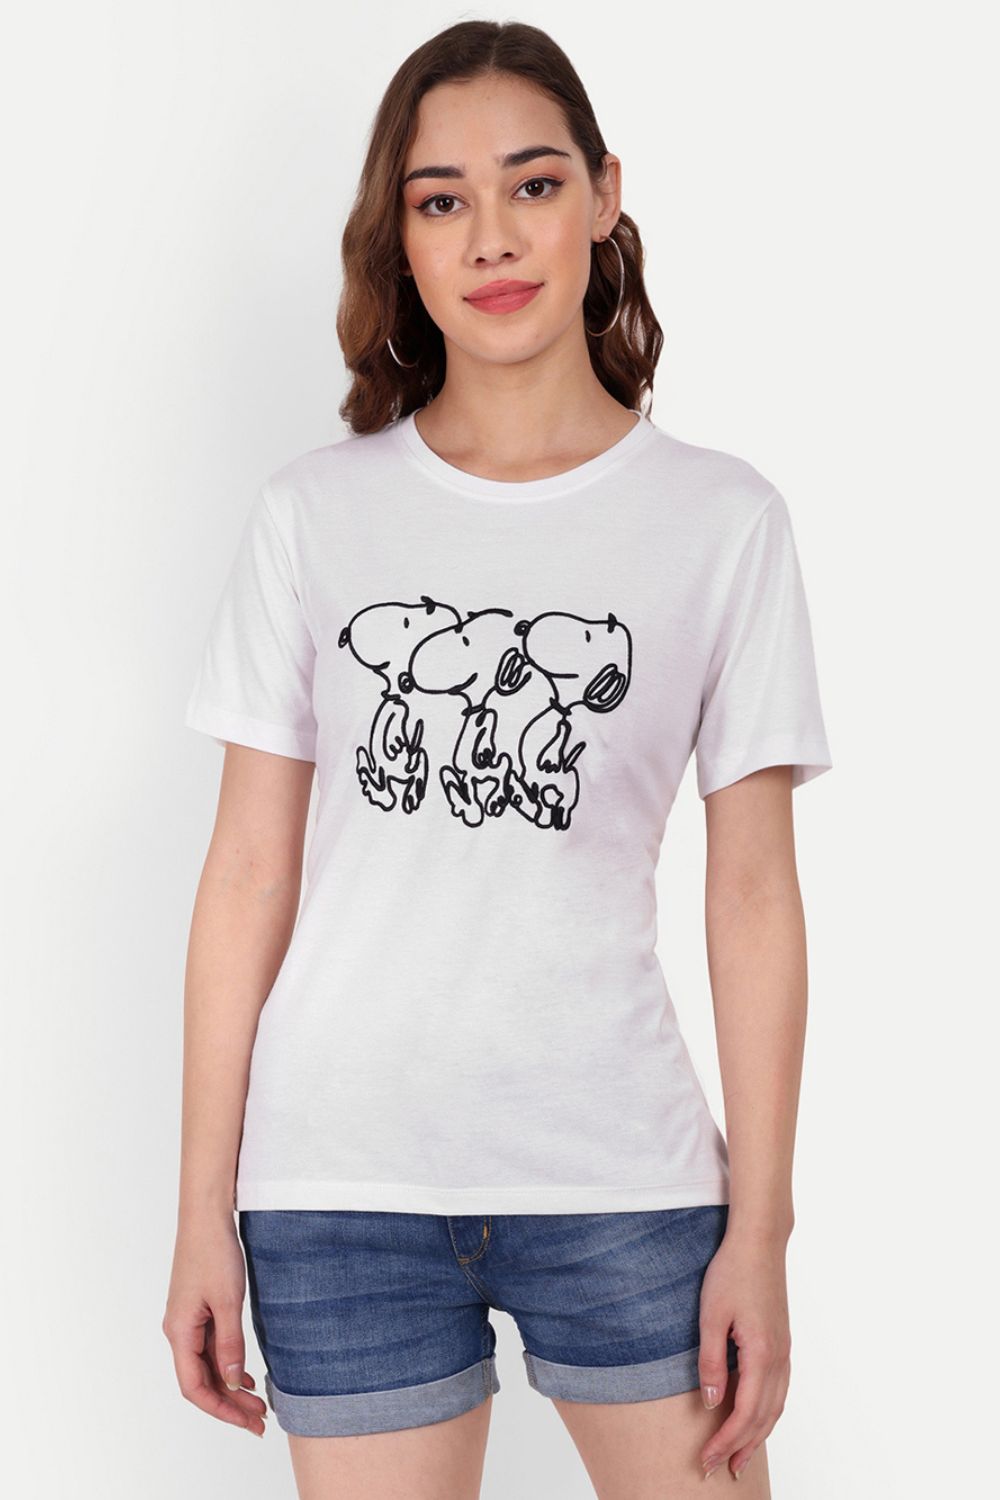 Snoopy embroidery T-shirt